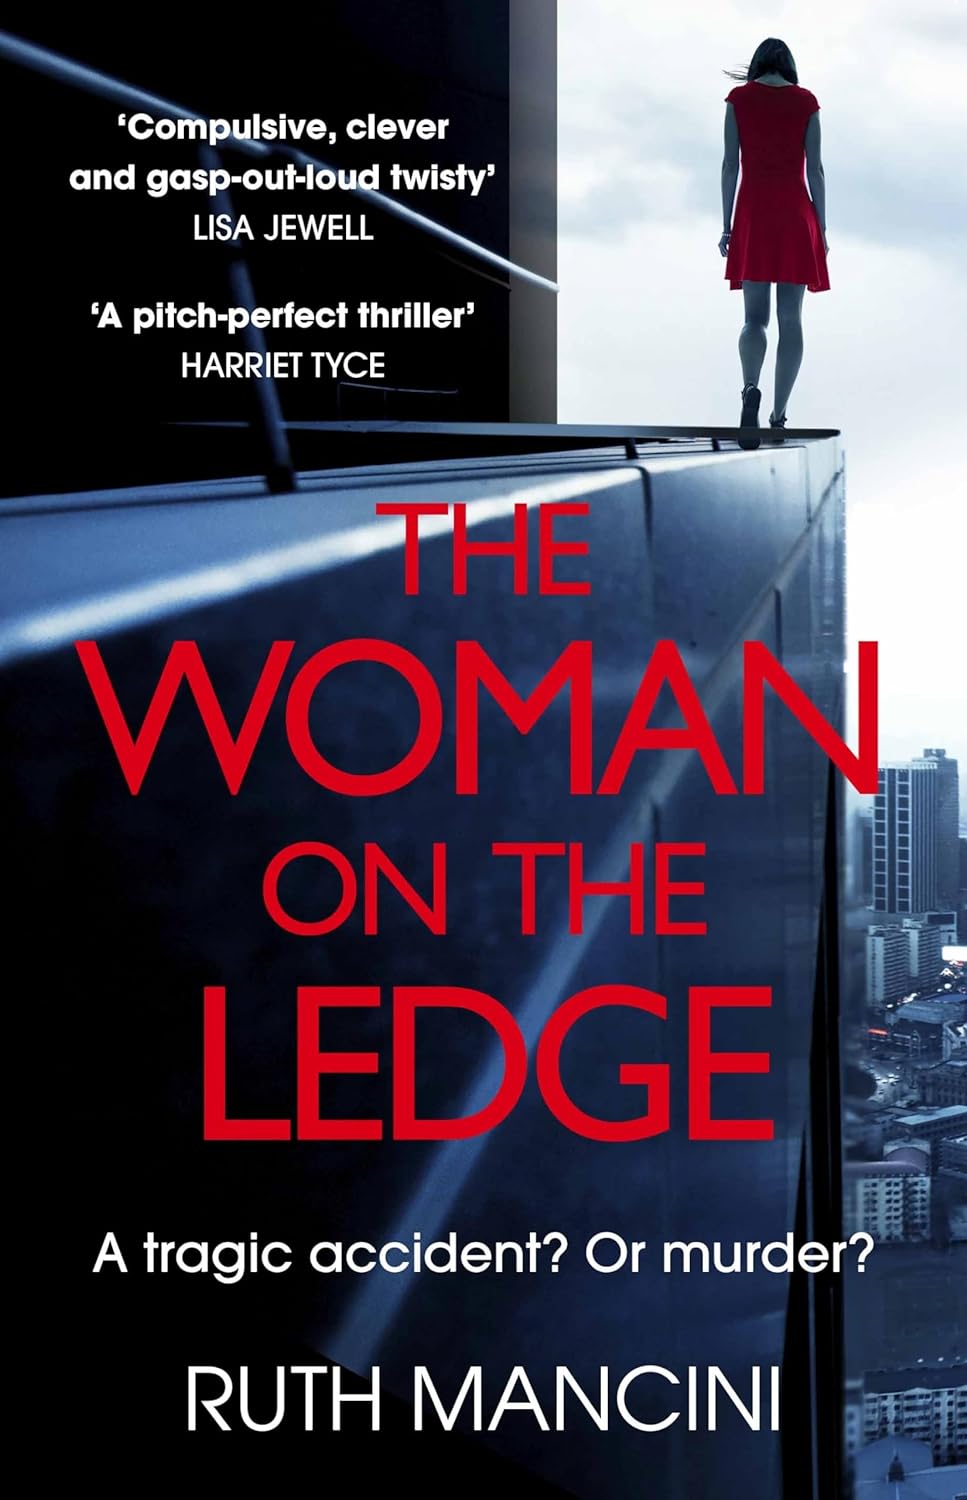 The_Woman_on_the_ledge_book_cover